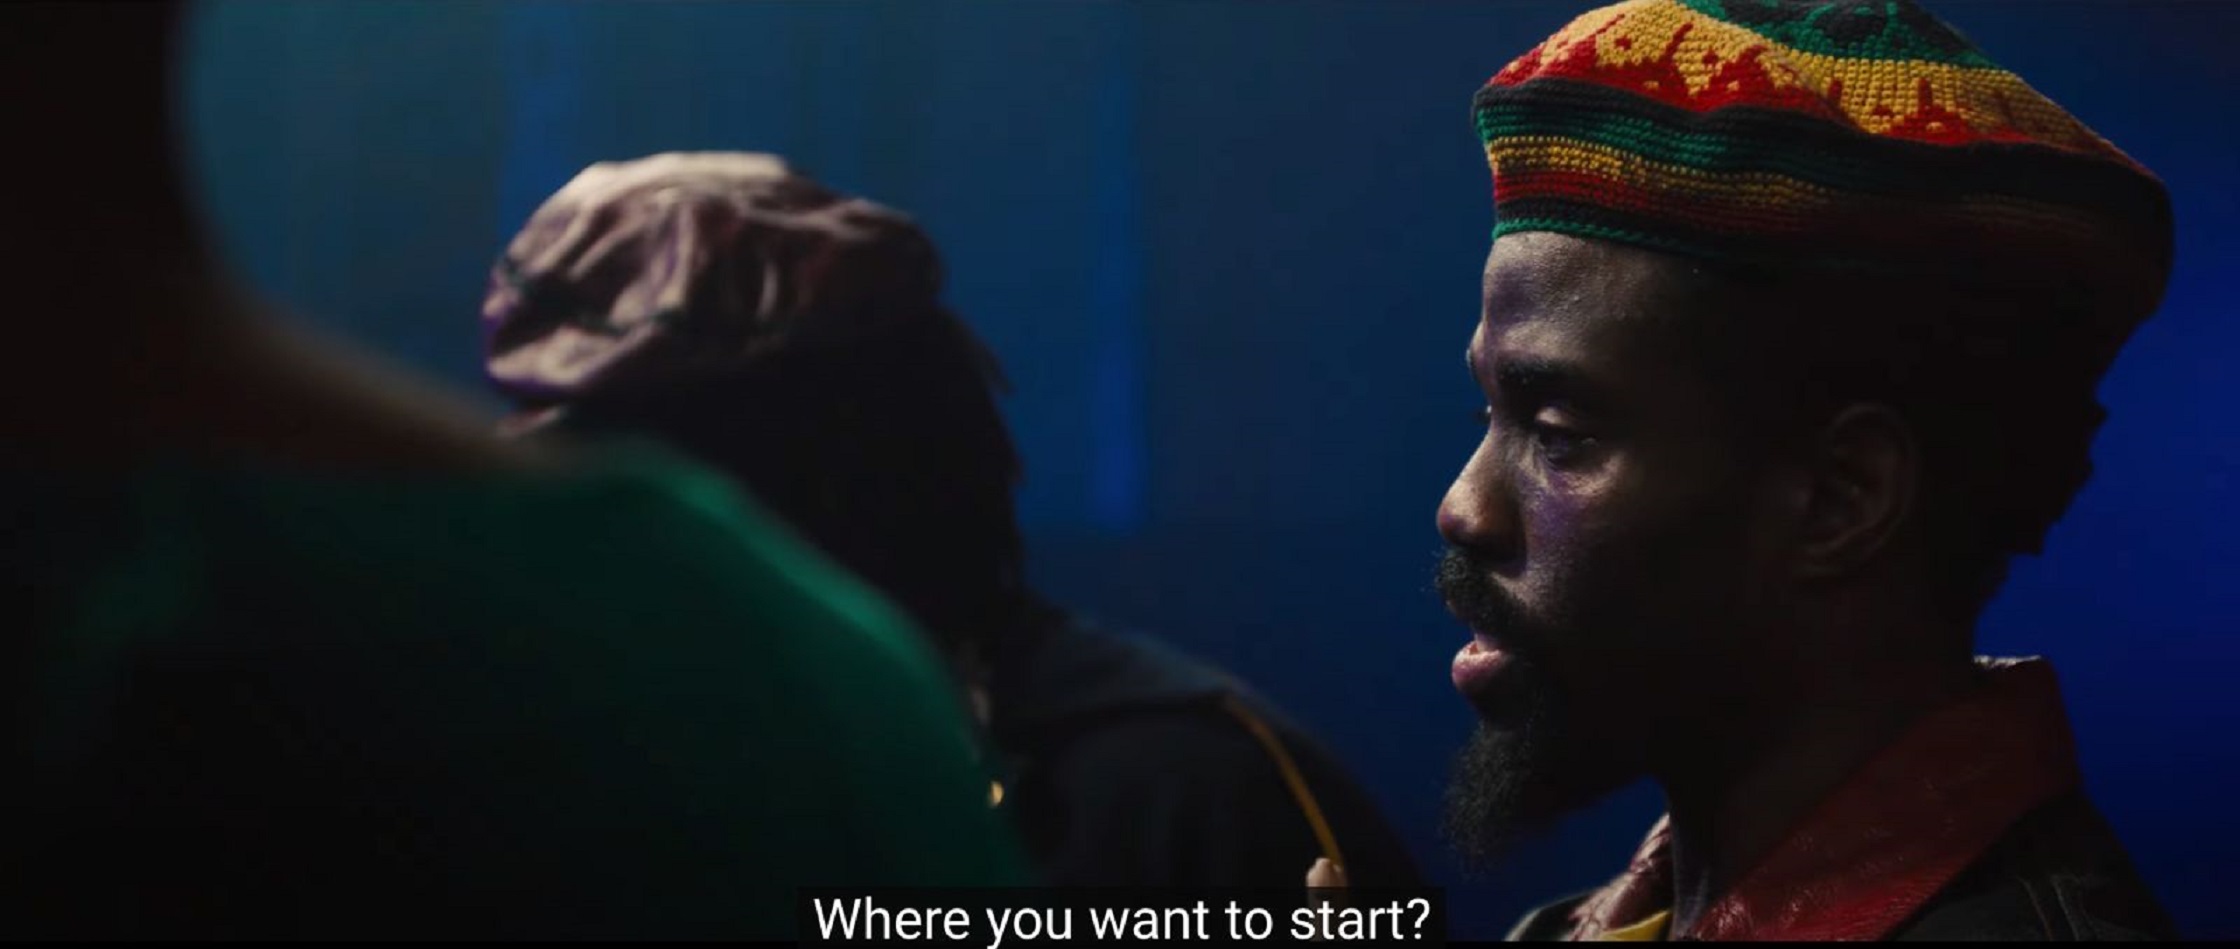 HECTOR ROOTS LEWIS MAKES ACTING DEBUT IN “BOB MARLEY: ONE LOVE” BIOPIC